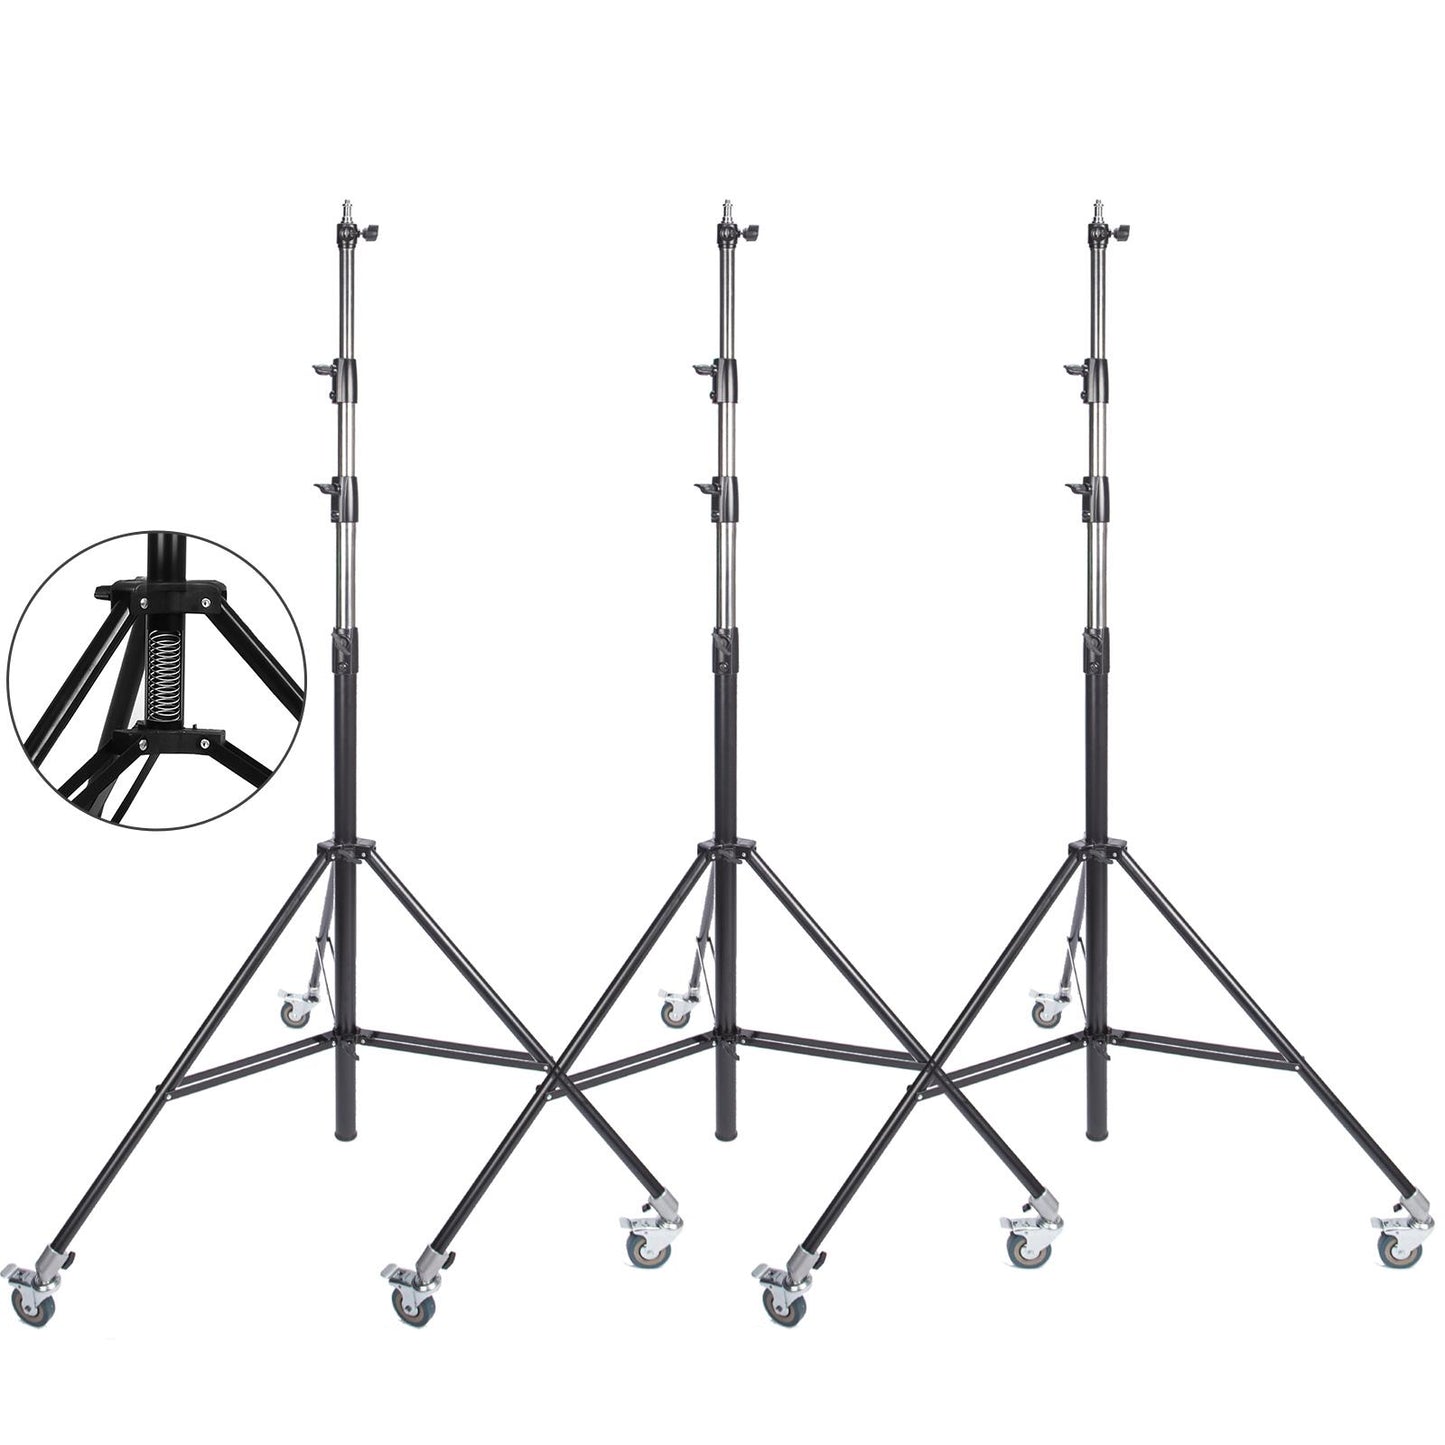 13ft 4M Heavy Duty Light Stand with Pulleys and Carry Bag, Spring Cushioned Tripod Stand, Photography Wheeled Stand for Photo Studio Monolight, Softbox and Other Photographic Equipment, 3 Sets